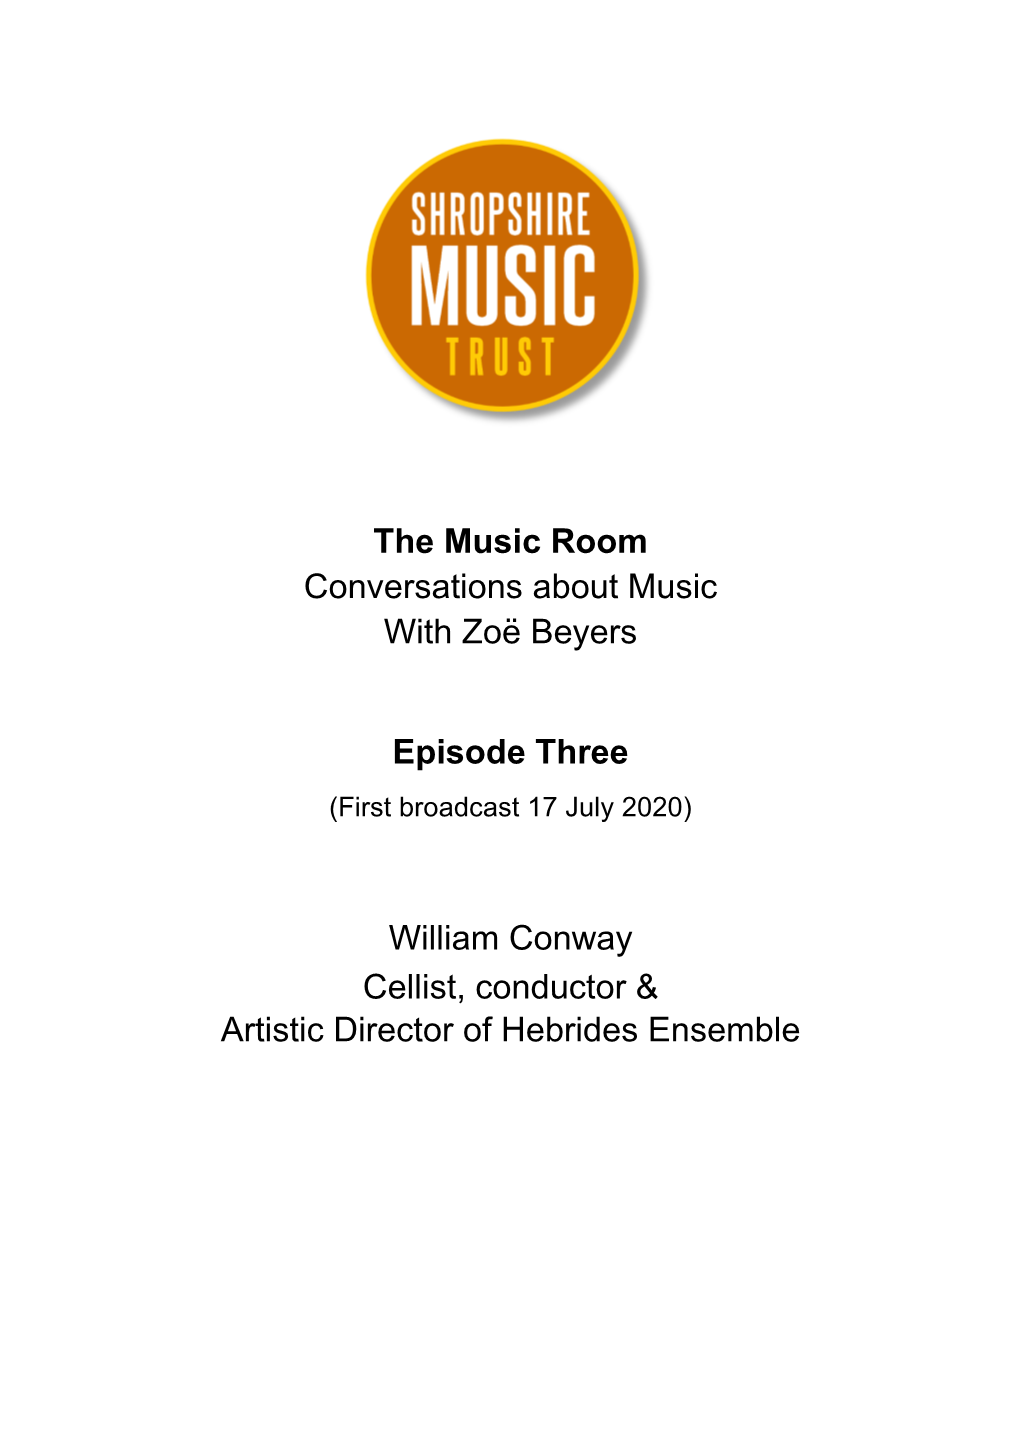 The Music Room Conversations About Music with Zoë Beyers Episode Three William Conway Cellist, Conductor & Artistic Direc